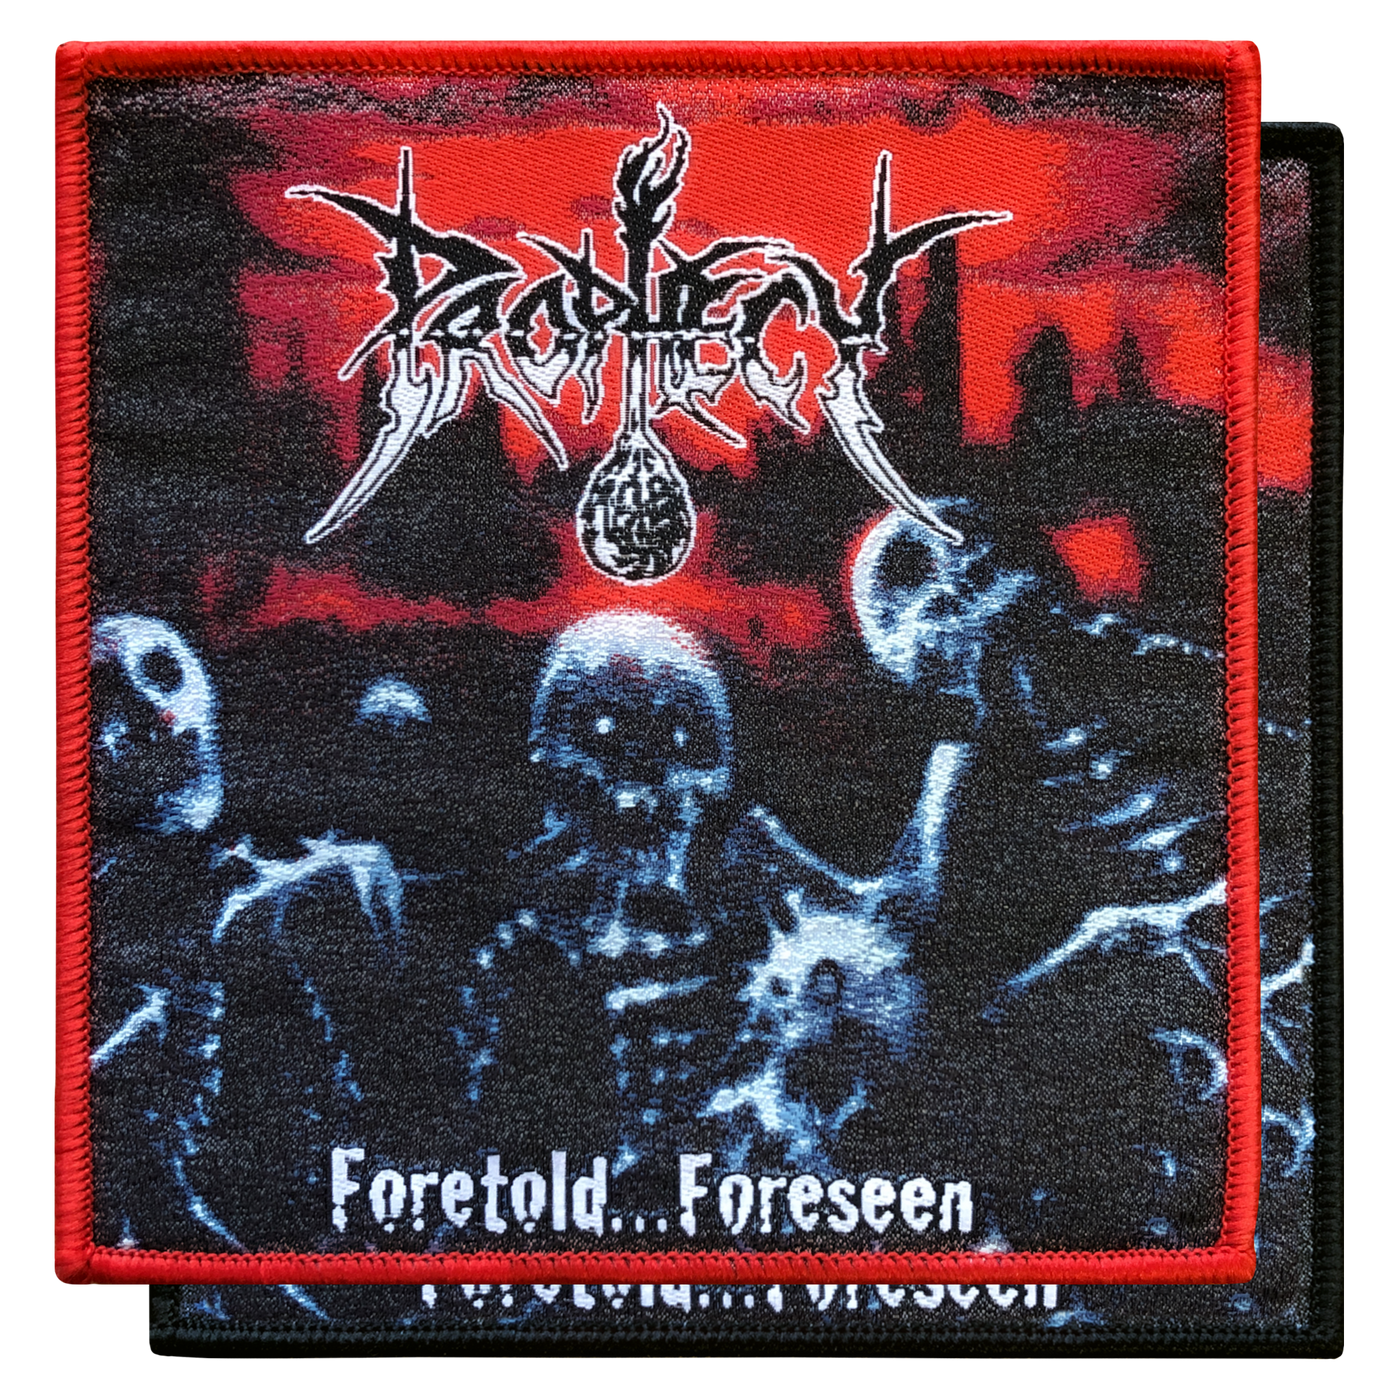 Prophecy 'Foretold... Foreseen' Patch